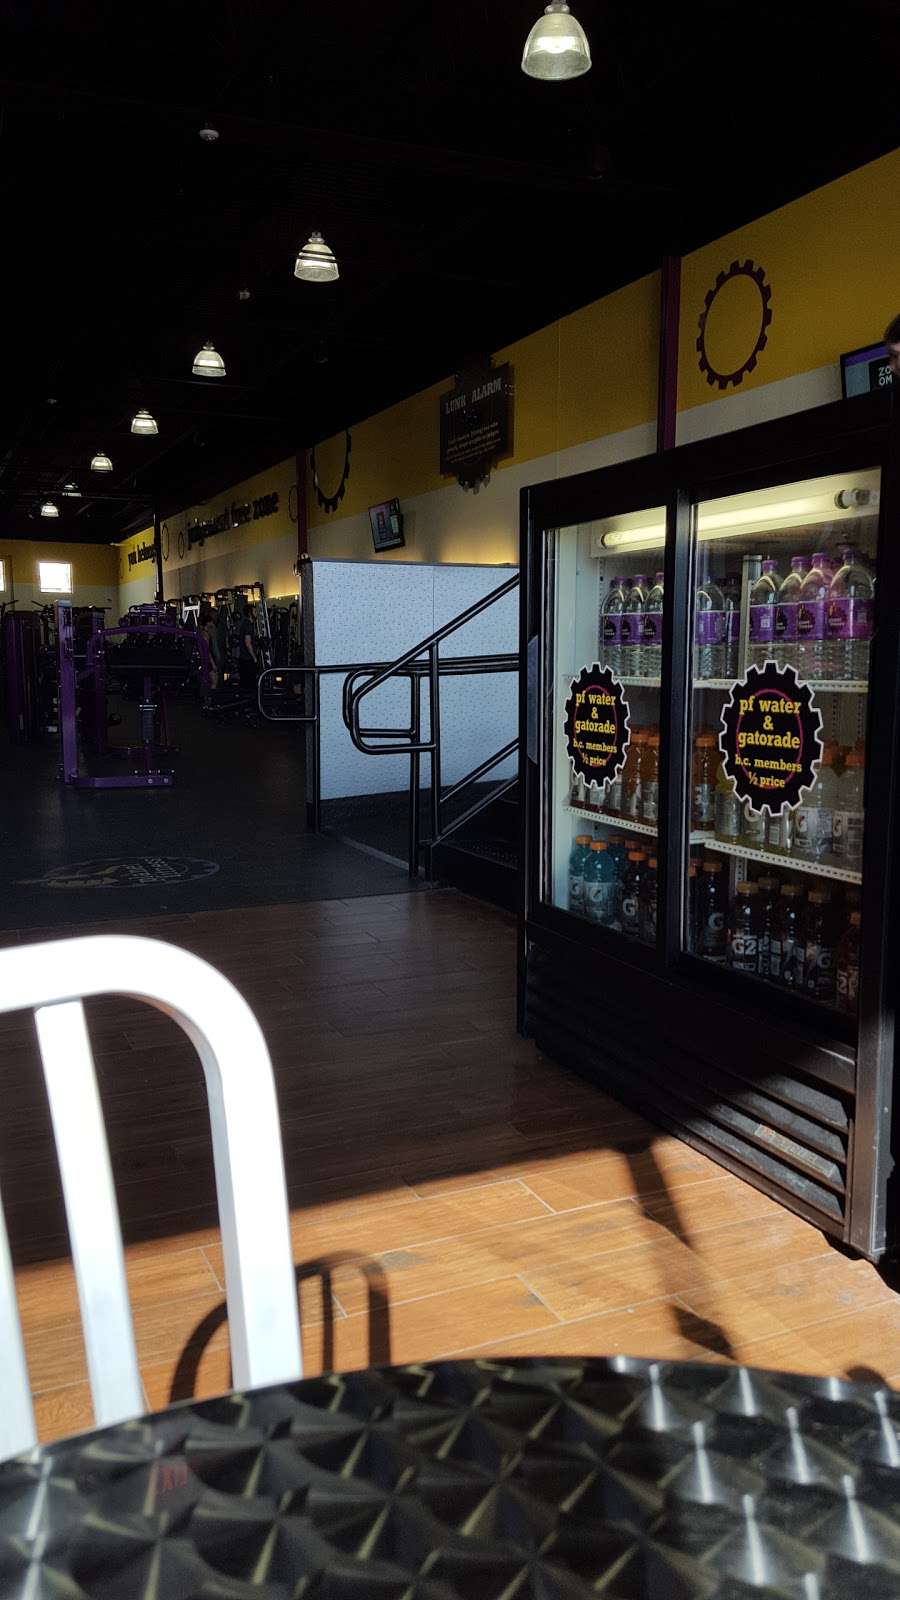 Planet Fitness | 1163 Wilmington Pike, West Chester, PA 19382 | Phone: (484) 301-3636